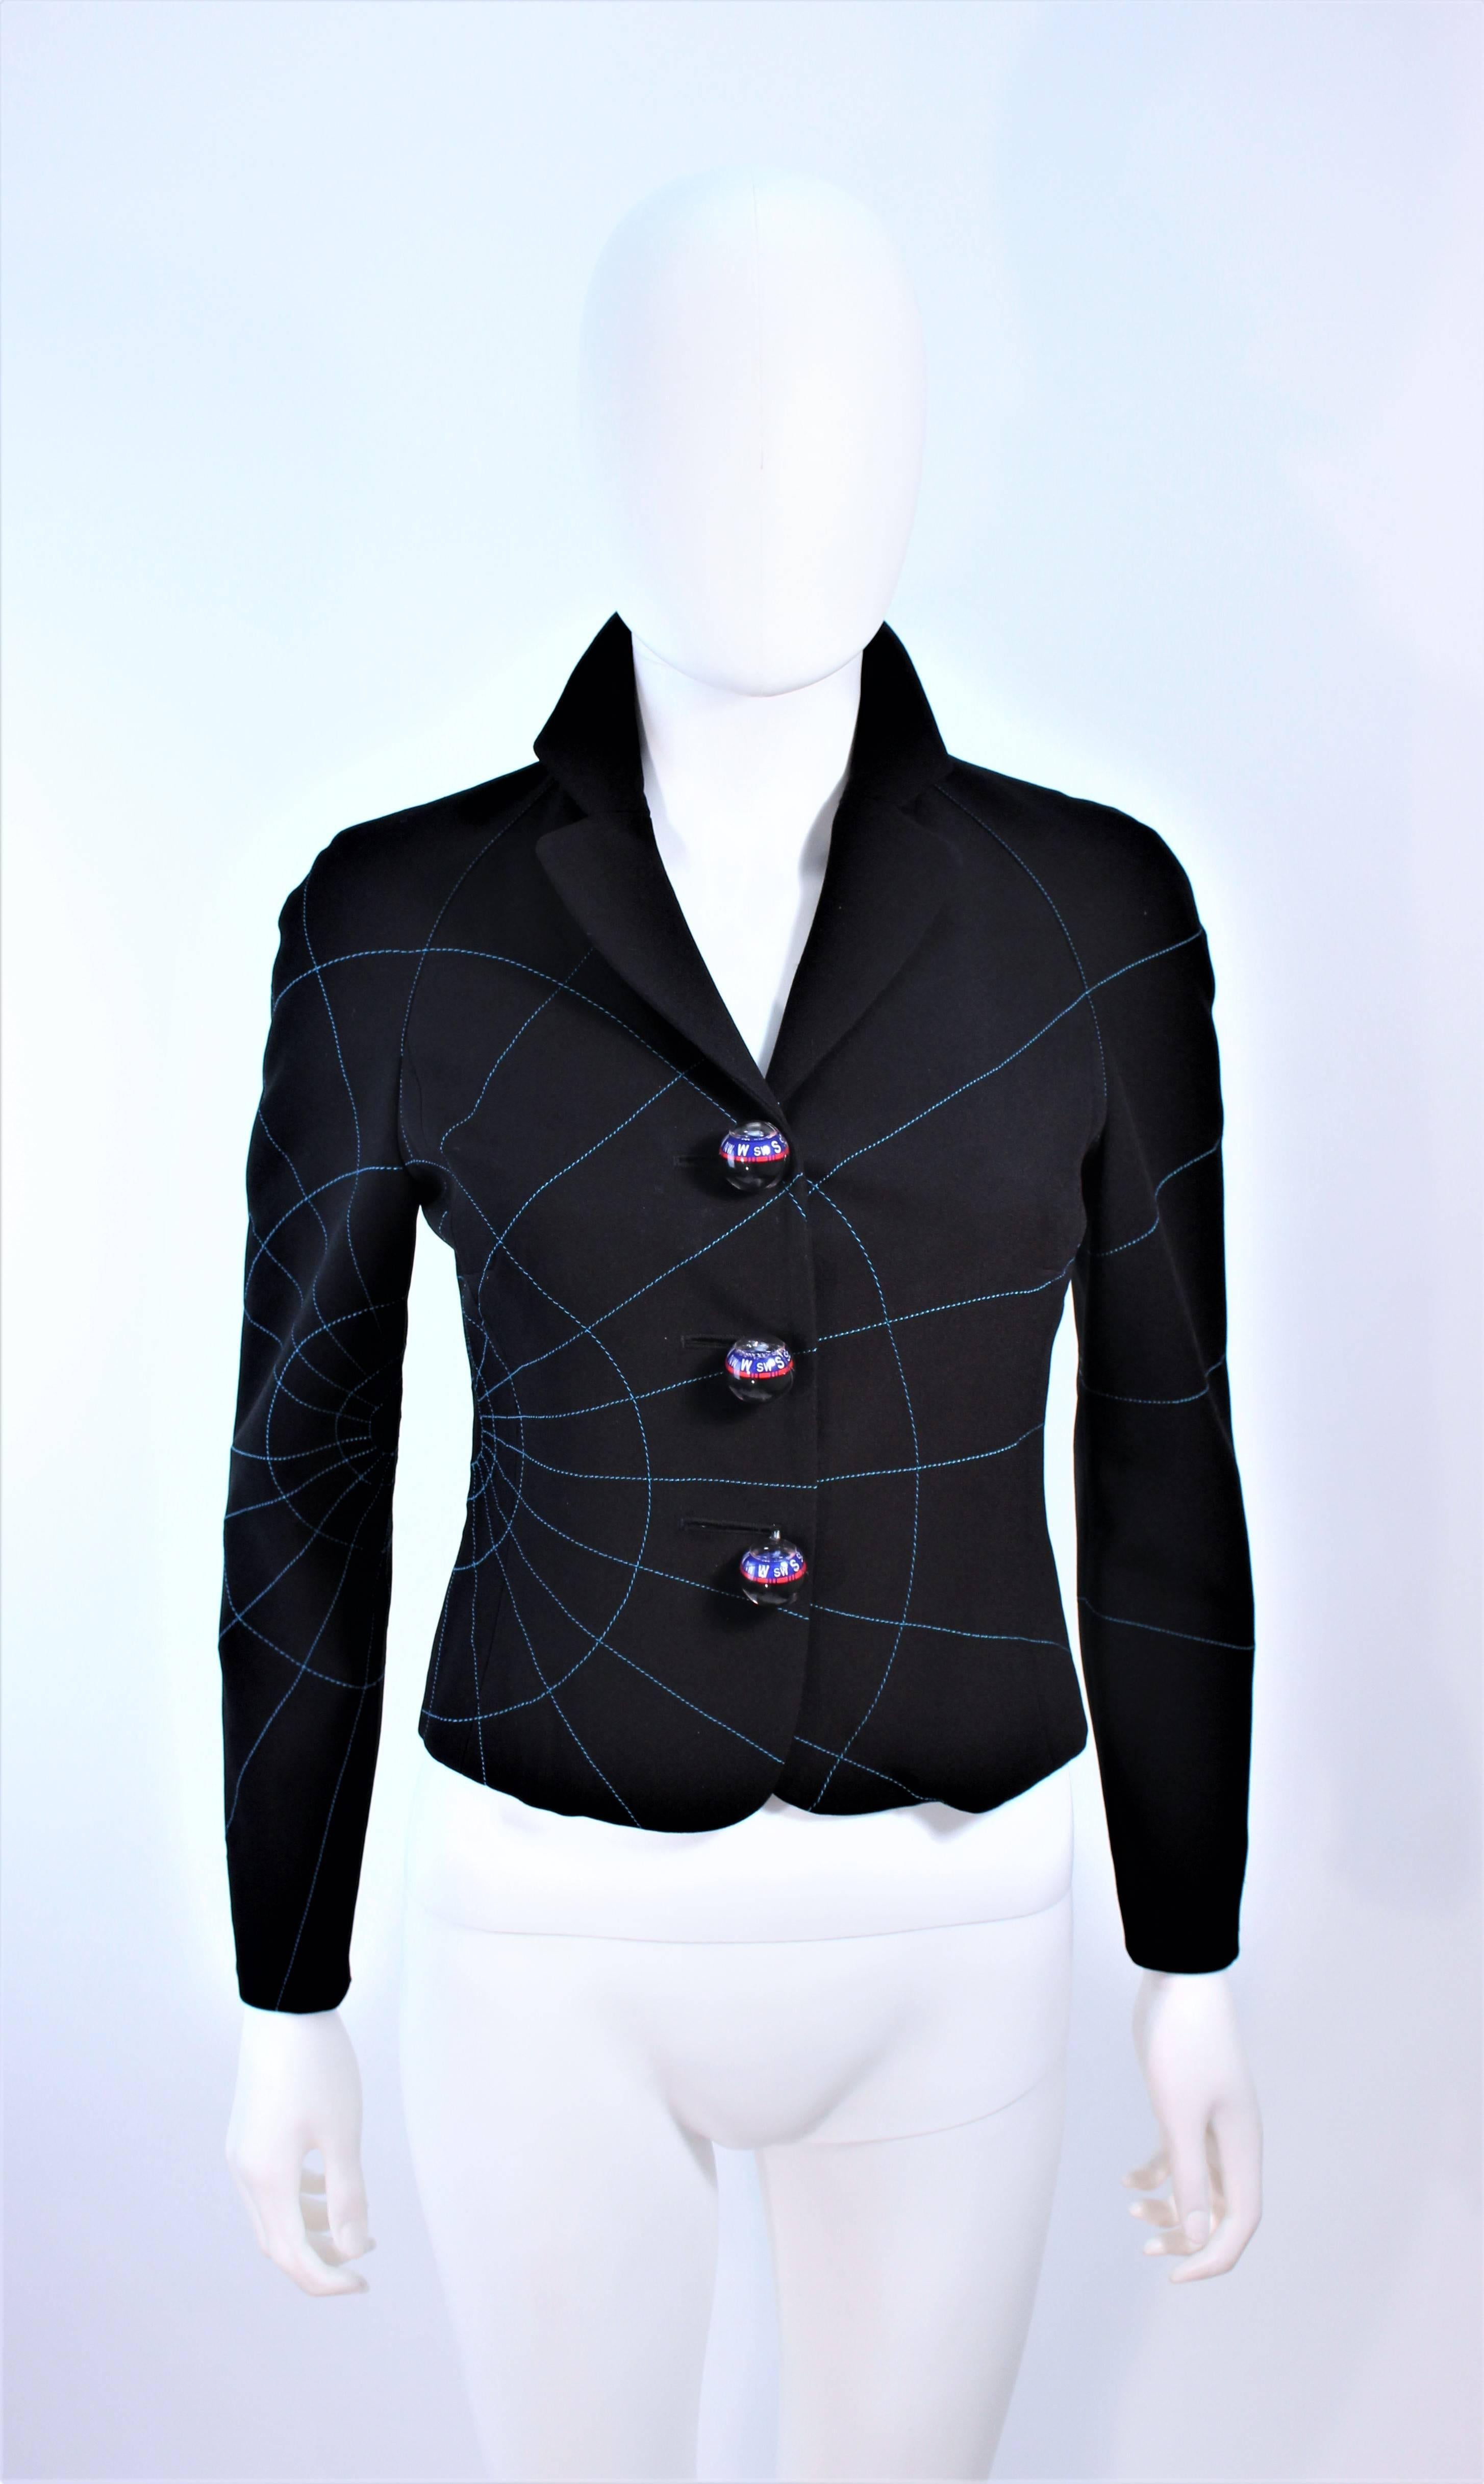 This Moschino Cheap & Chic jacket is composed with a black wool and features a geographic coordinates pattern with functional compass buttons. In excellent pre-owned condition.

**Please cross-reference measurements for personal accuracy. Size in